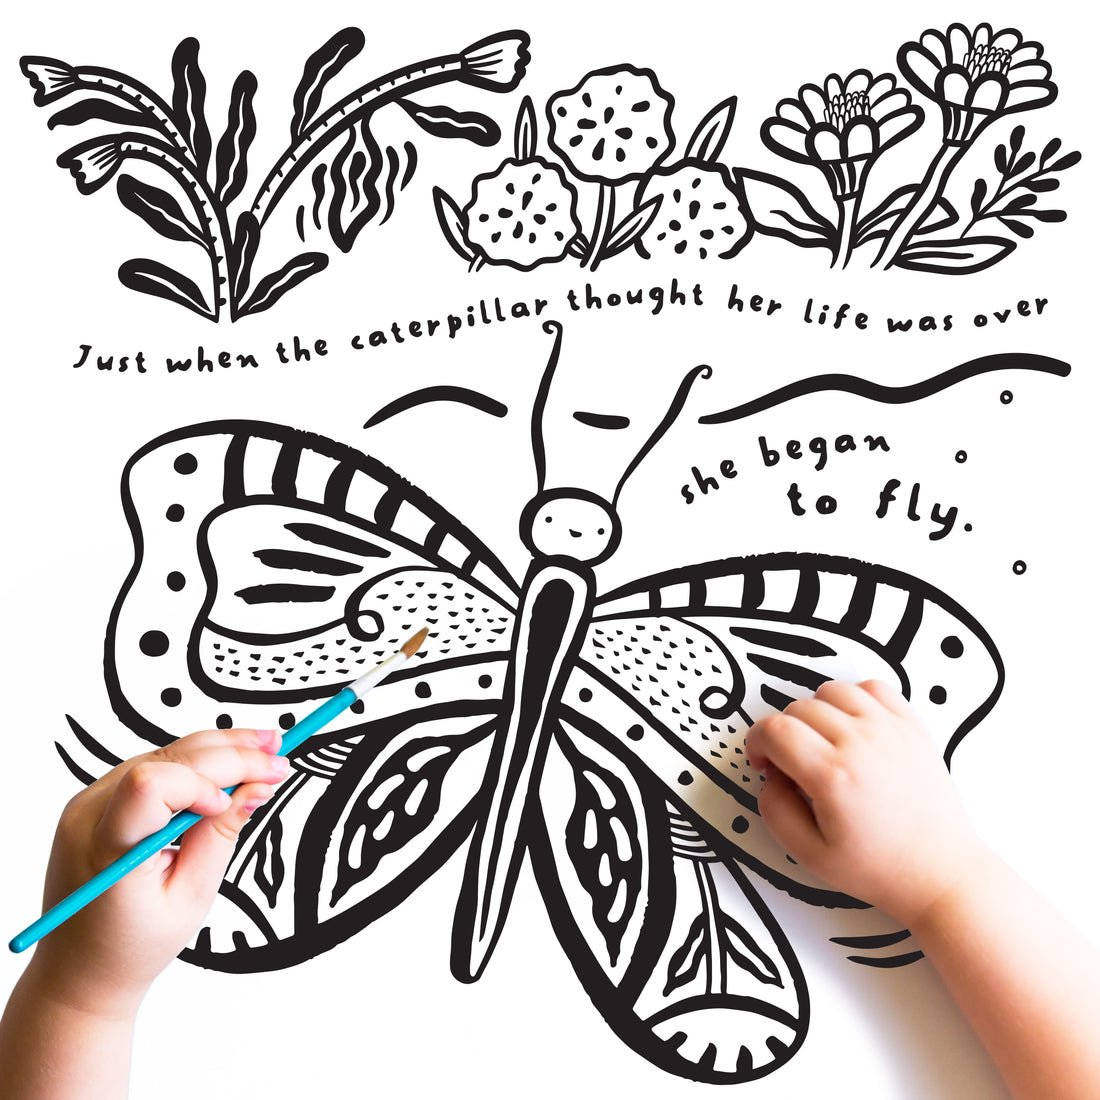 Butterfly Coloring Page Freebies Wee Gallery   